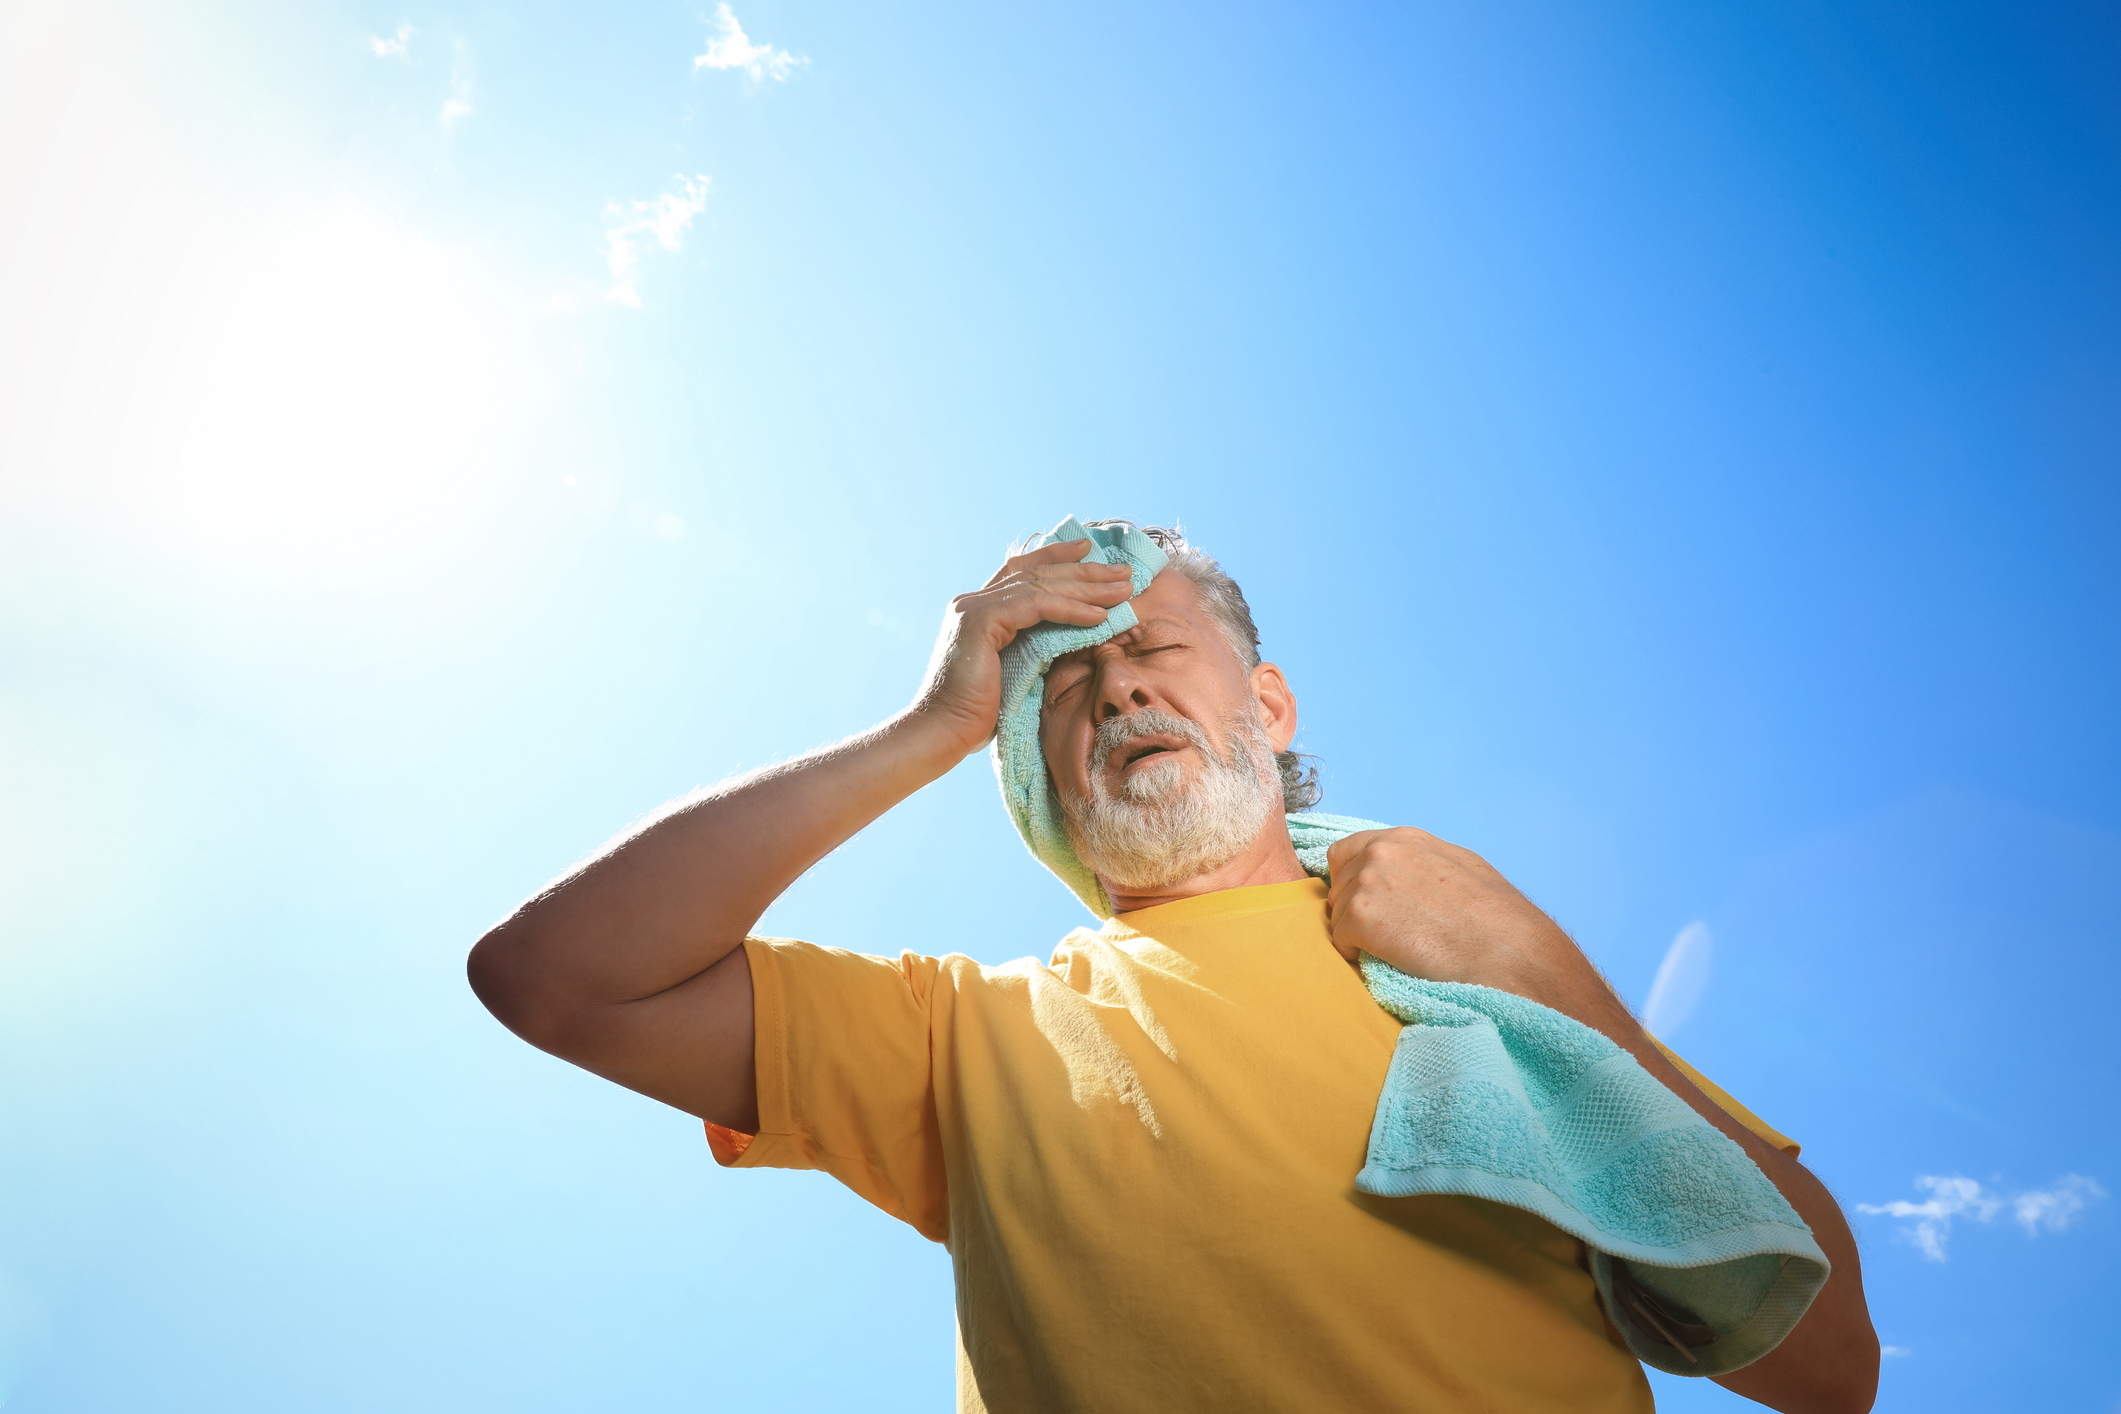 An older man wipes sweat off his brow, carrying a towel outside, bright sun overhead